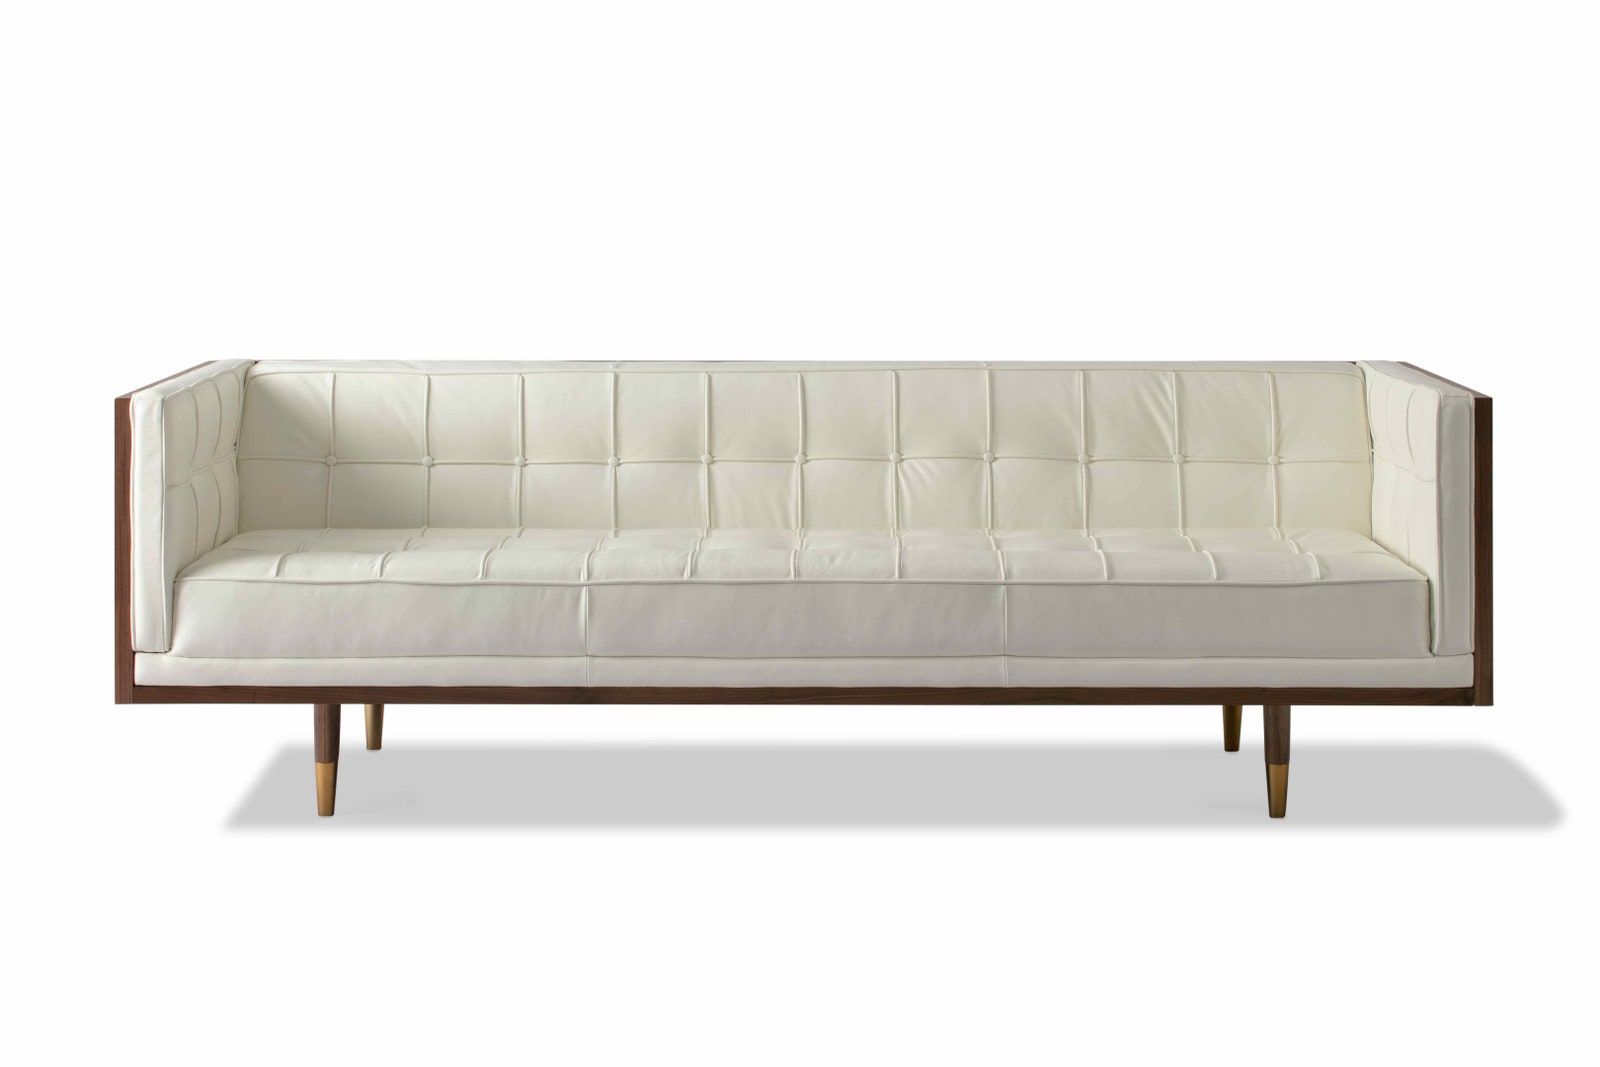 5 Mid Century Modern Sofas To Breathe Life Into Your Living Space |  Architectural Digest Throughout Mid Century Modern Sofas (View 6 of 15)